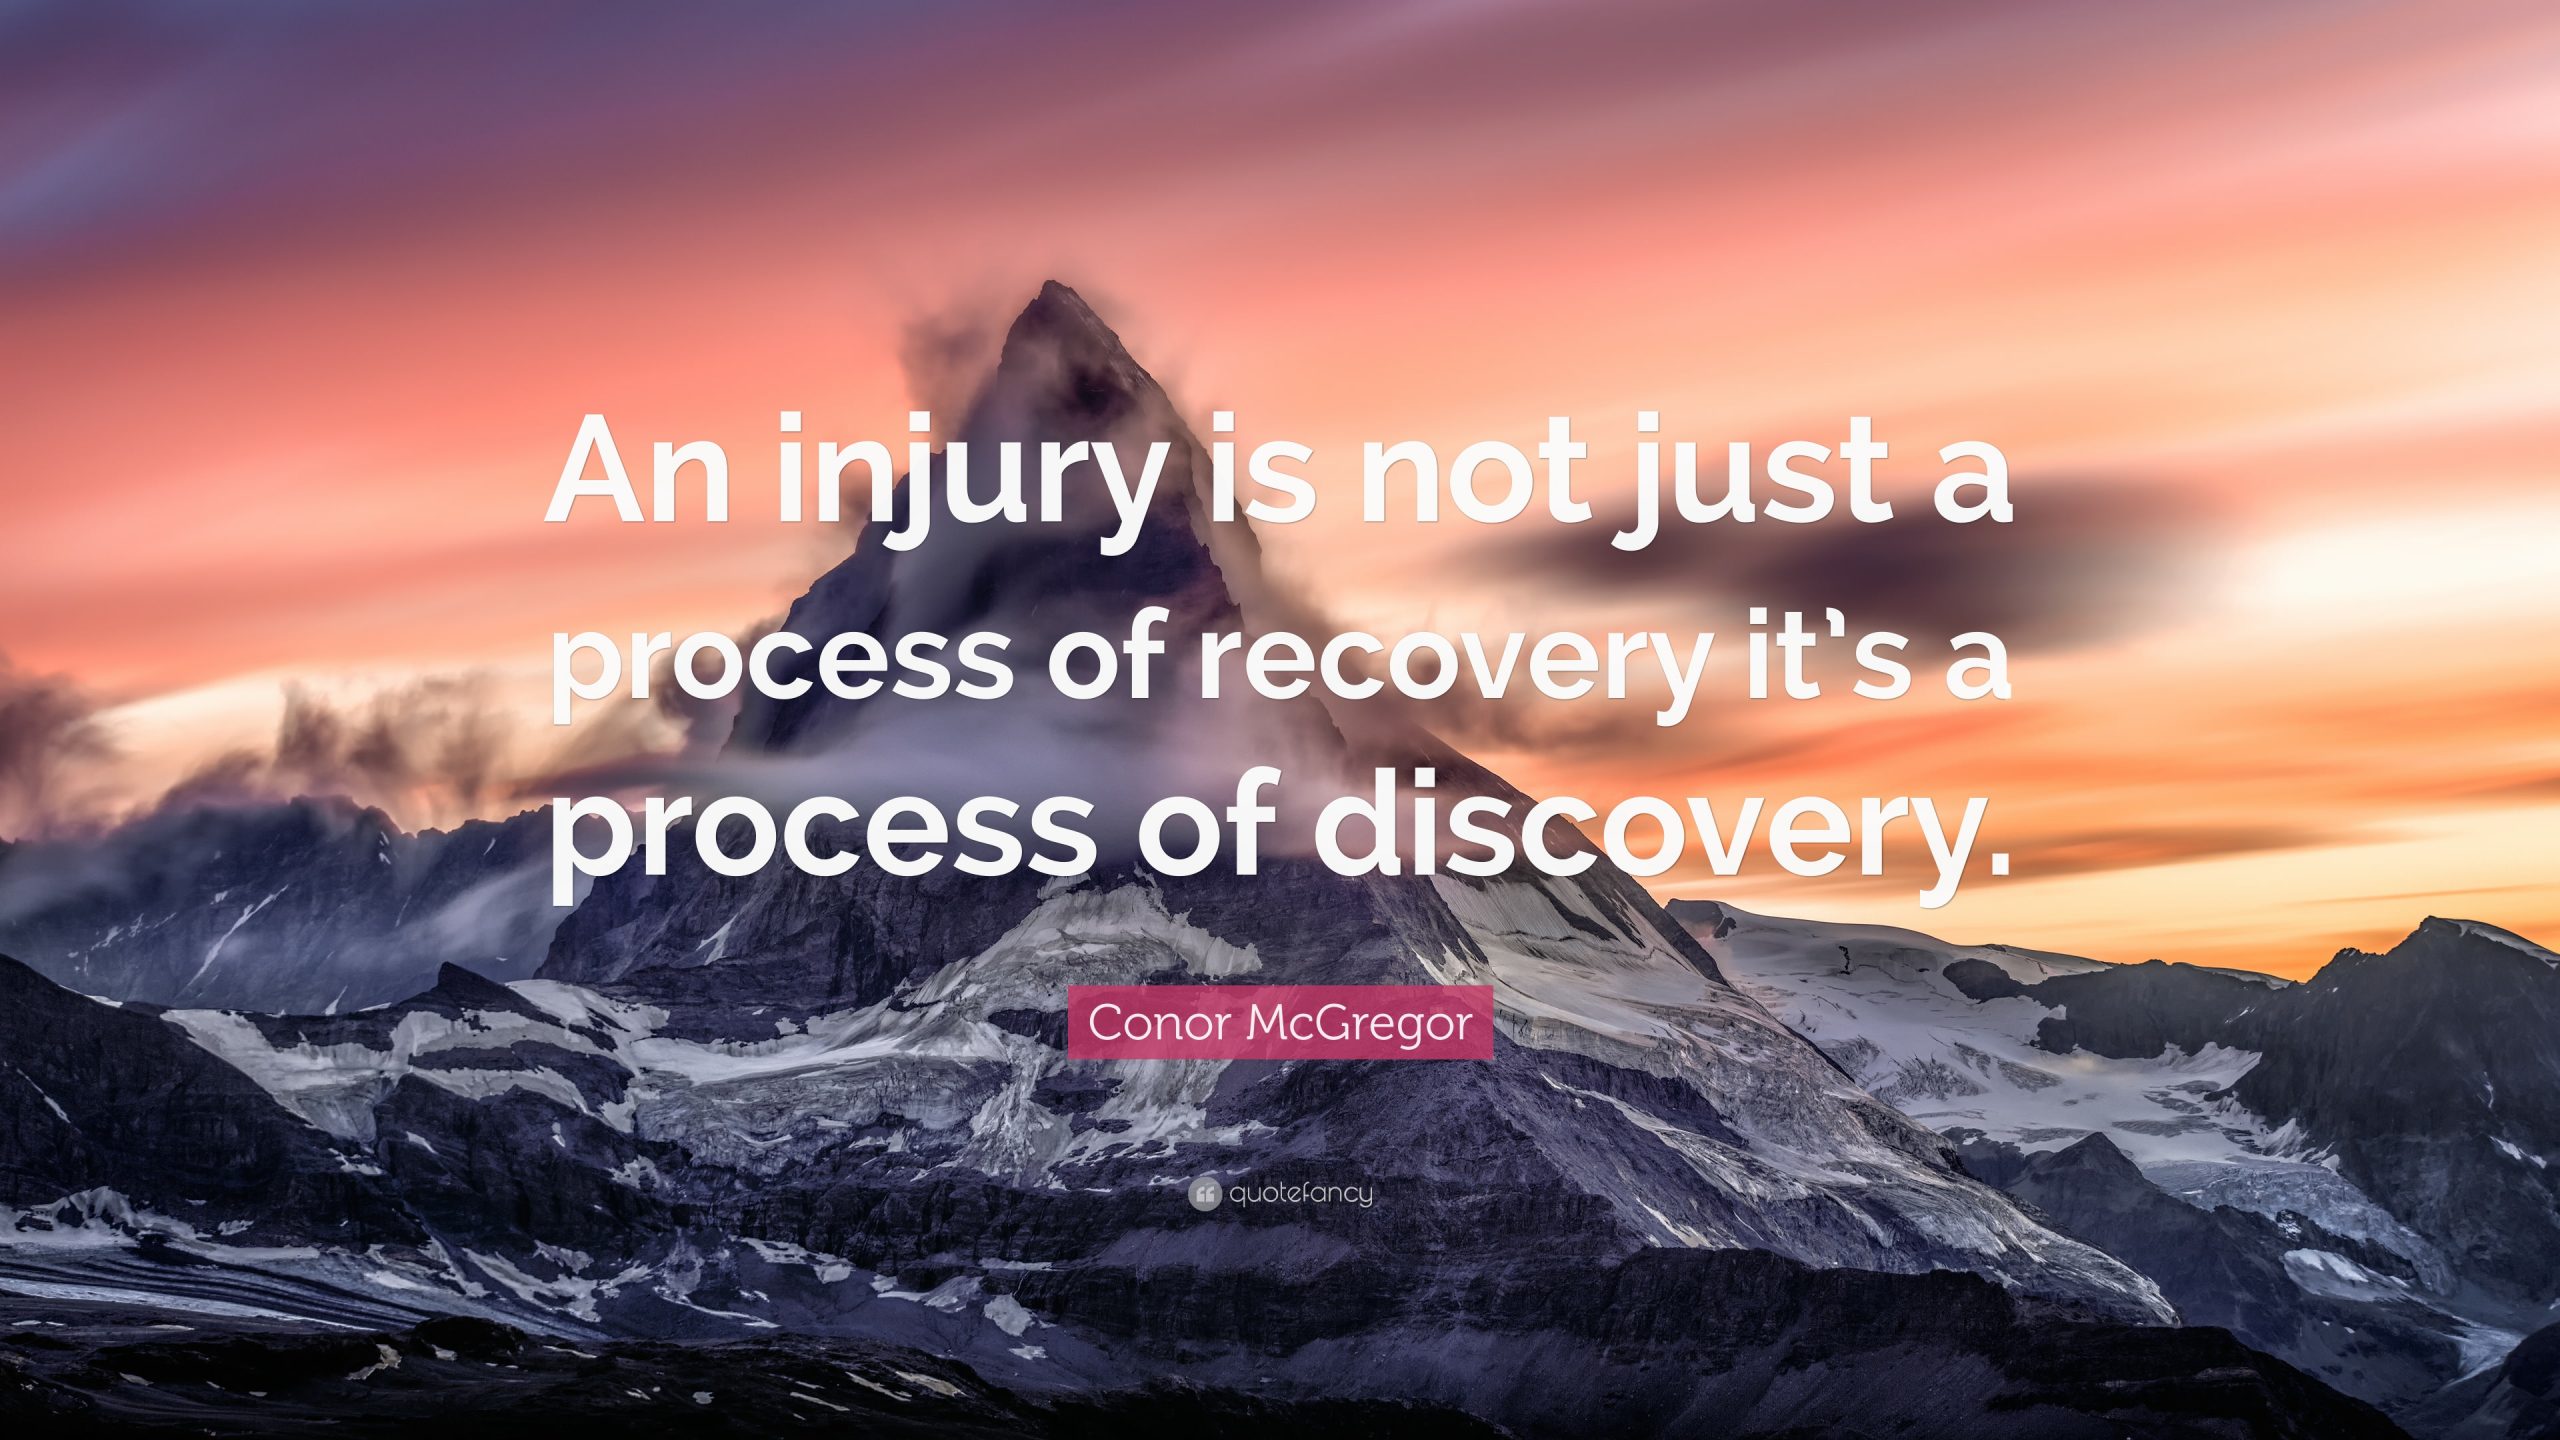 1 Injury is not just a process of recovery, it's a process of